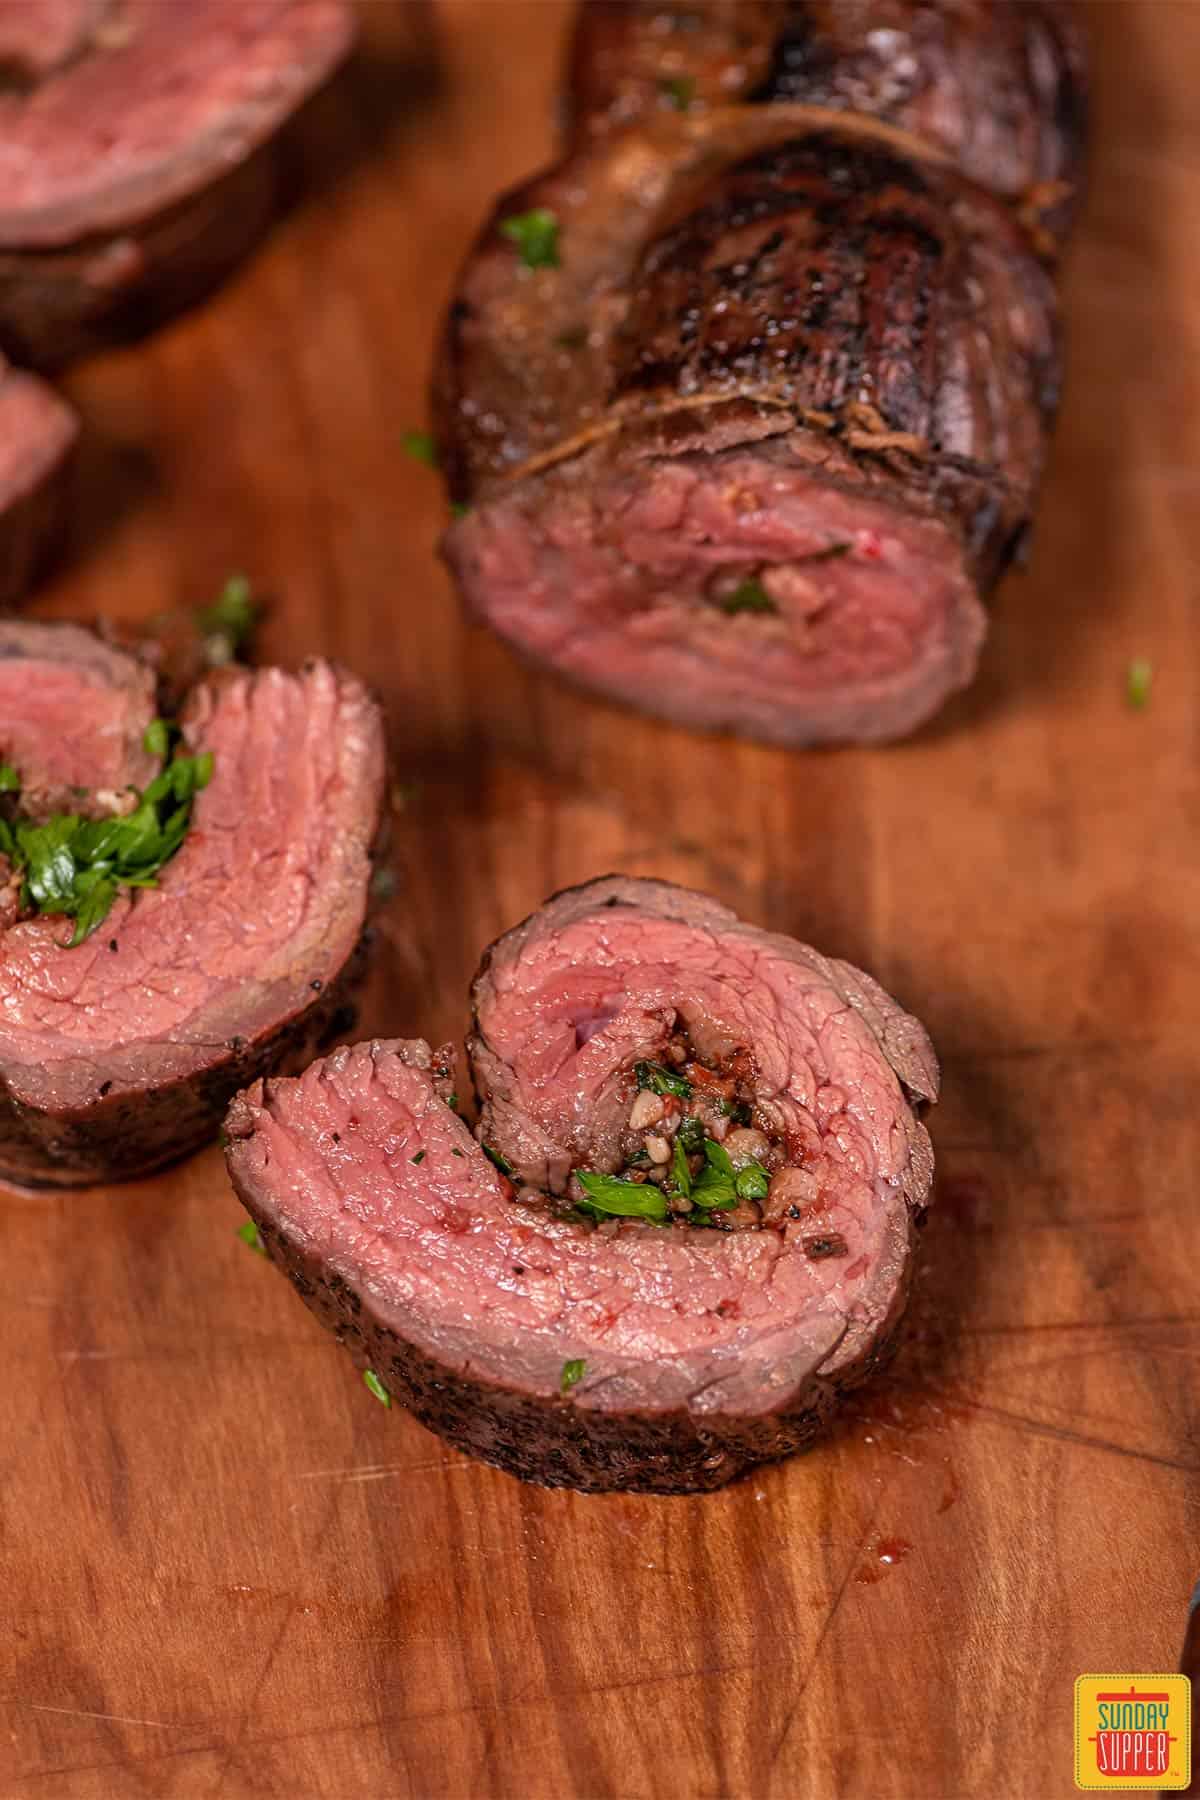 Sliced beef roulade on a wooden surface